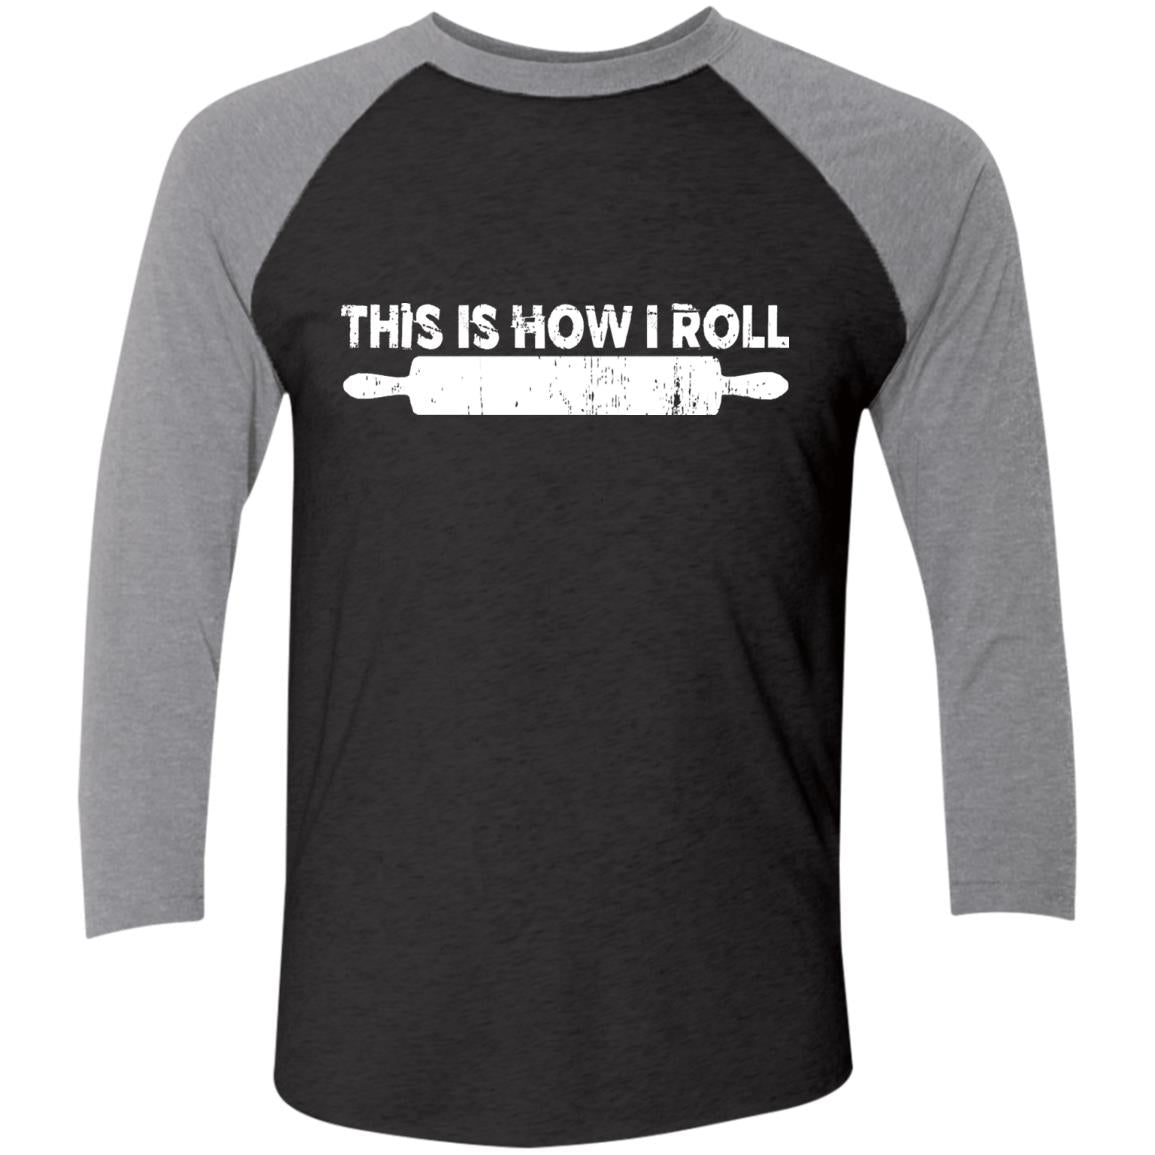 Chef Shirt Cook Gifts Baseball Raglan T-Shirt This Is How I Roll - GoneBold.gift